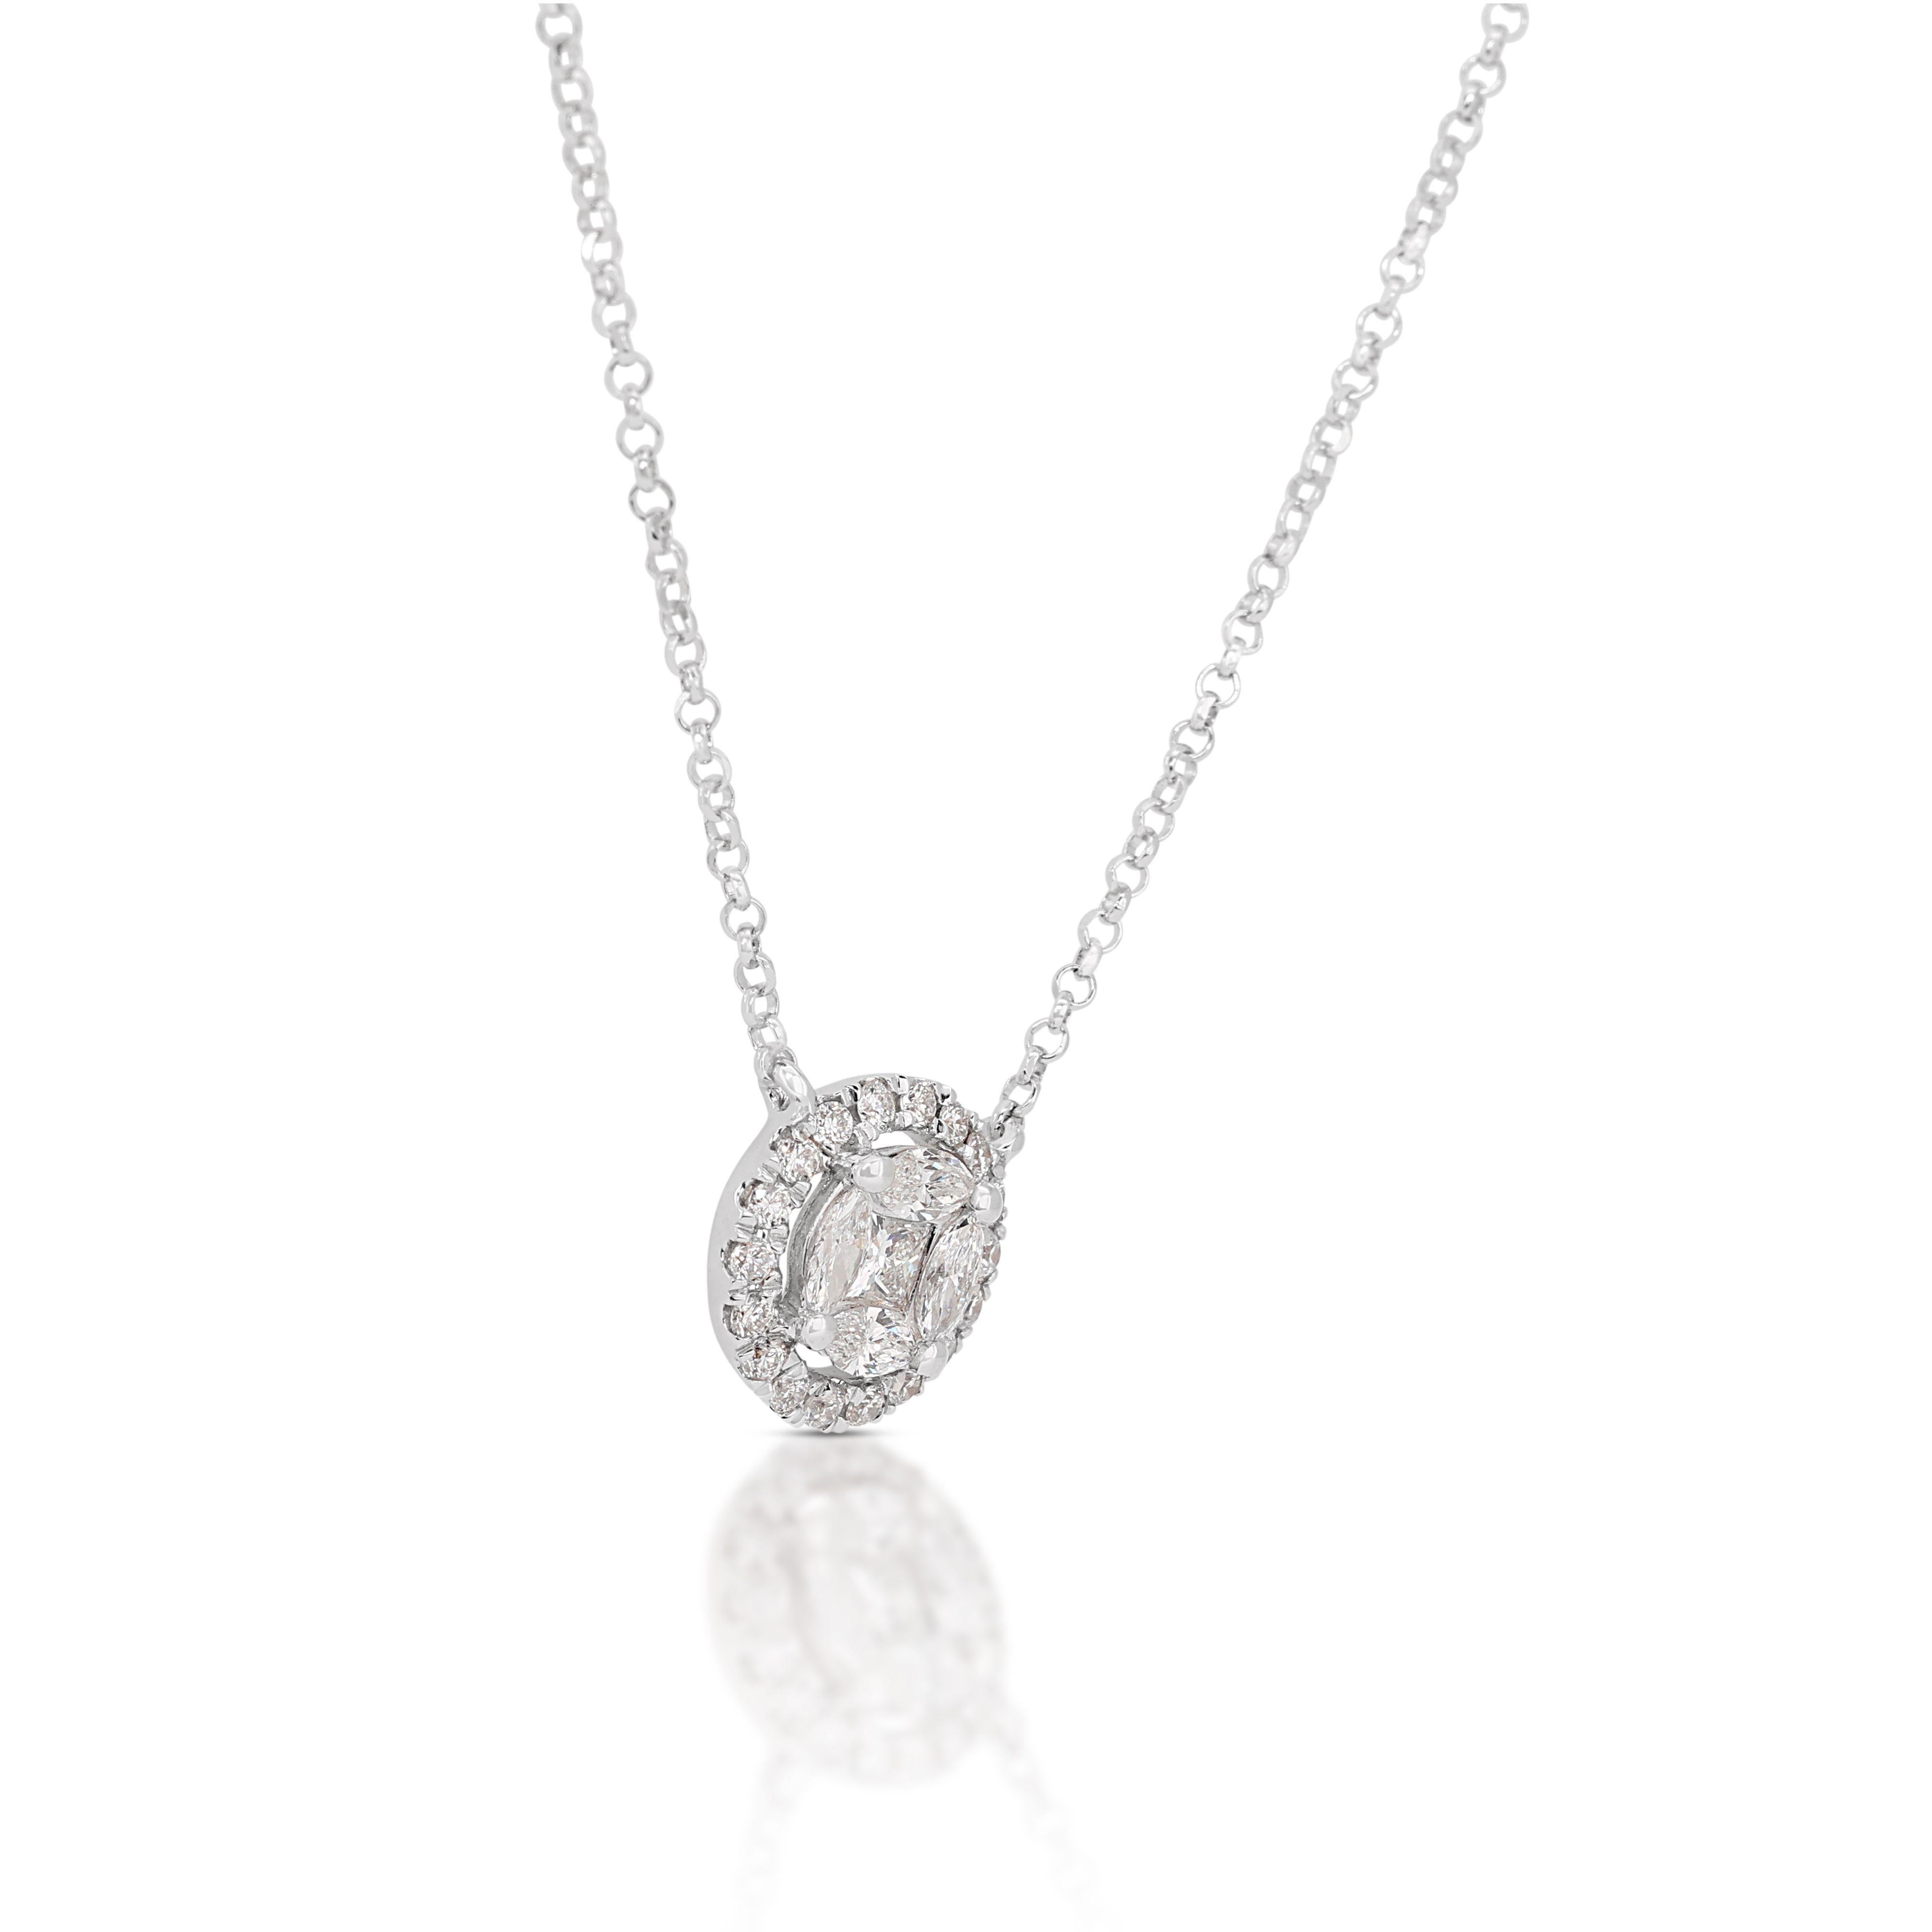 Women's 18K White Gold Diamond Necklace with 0.24 total carat weight